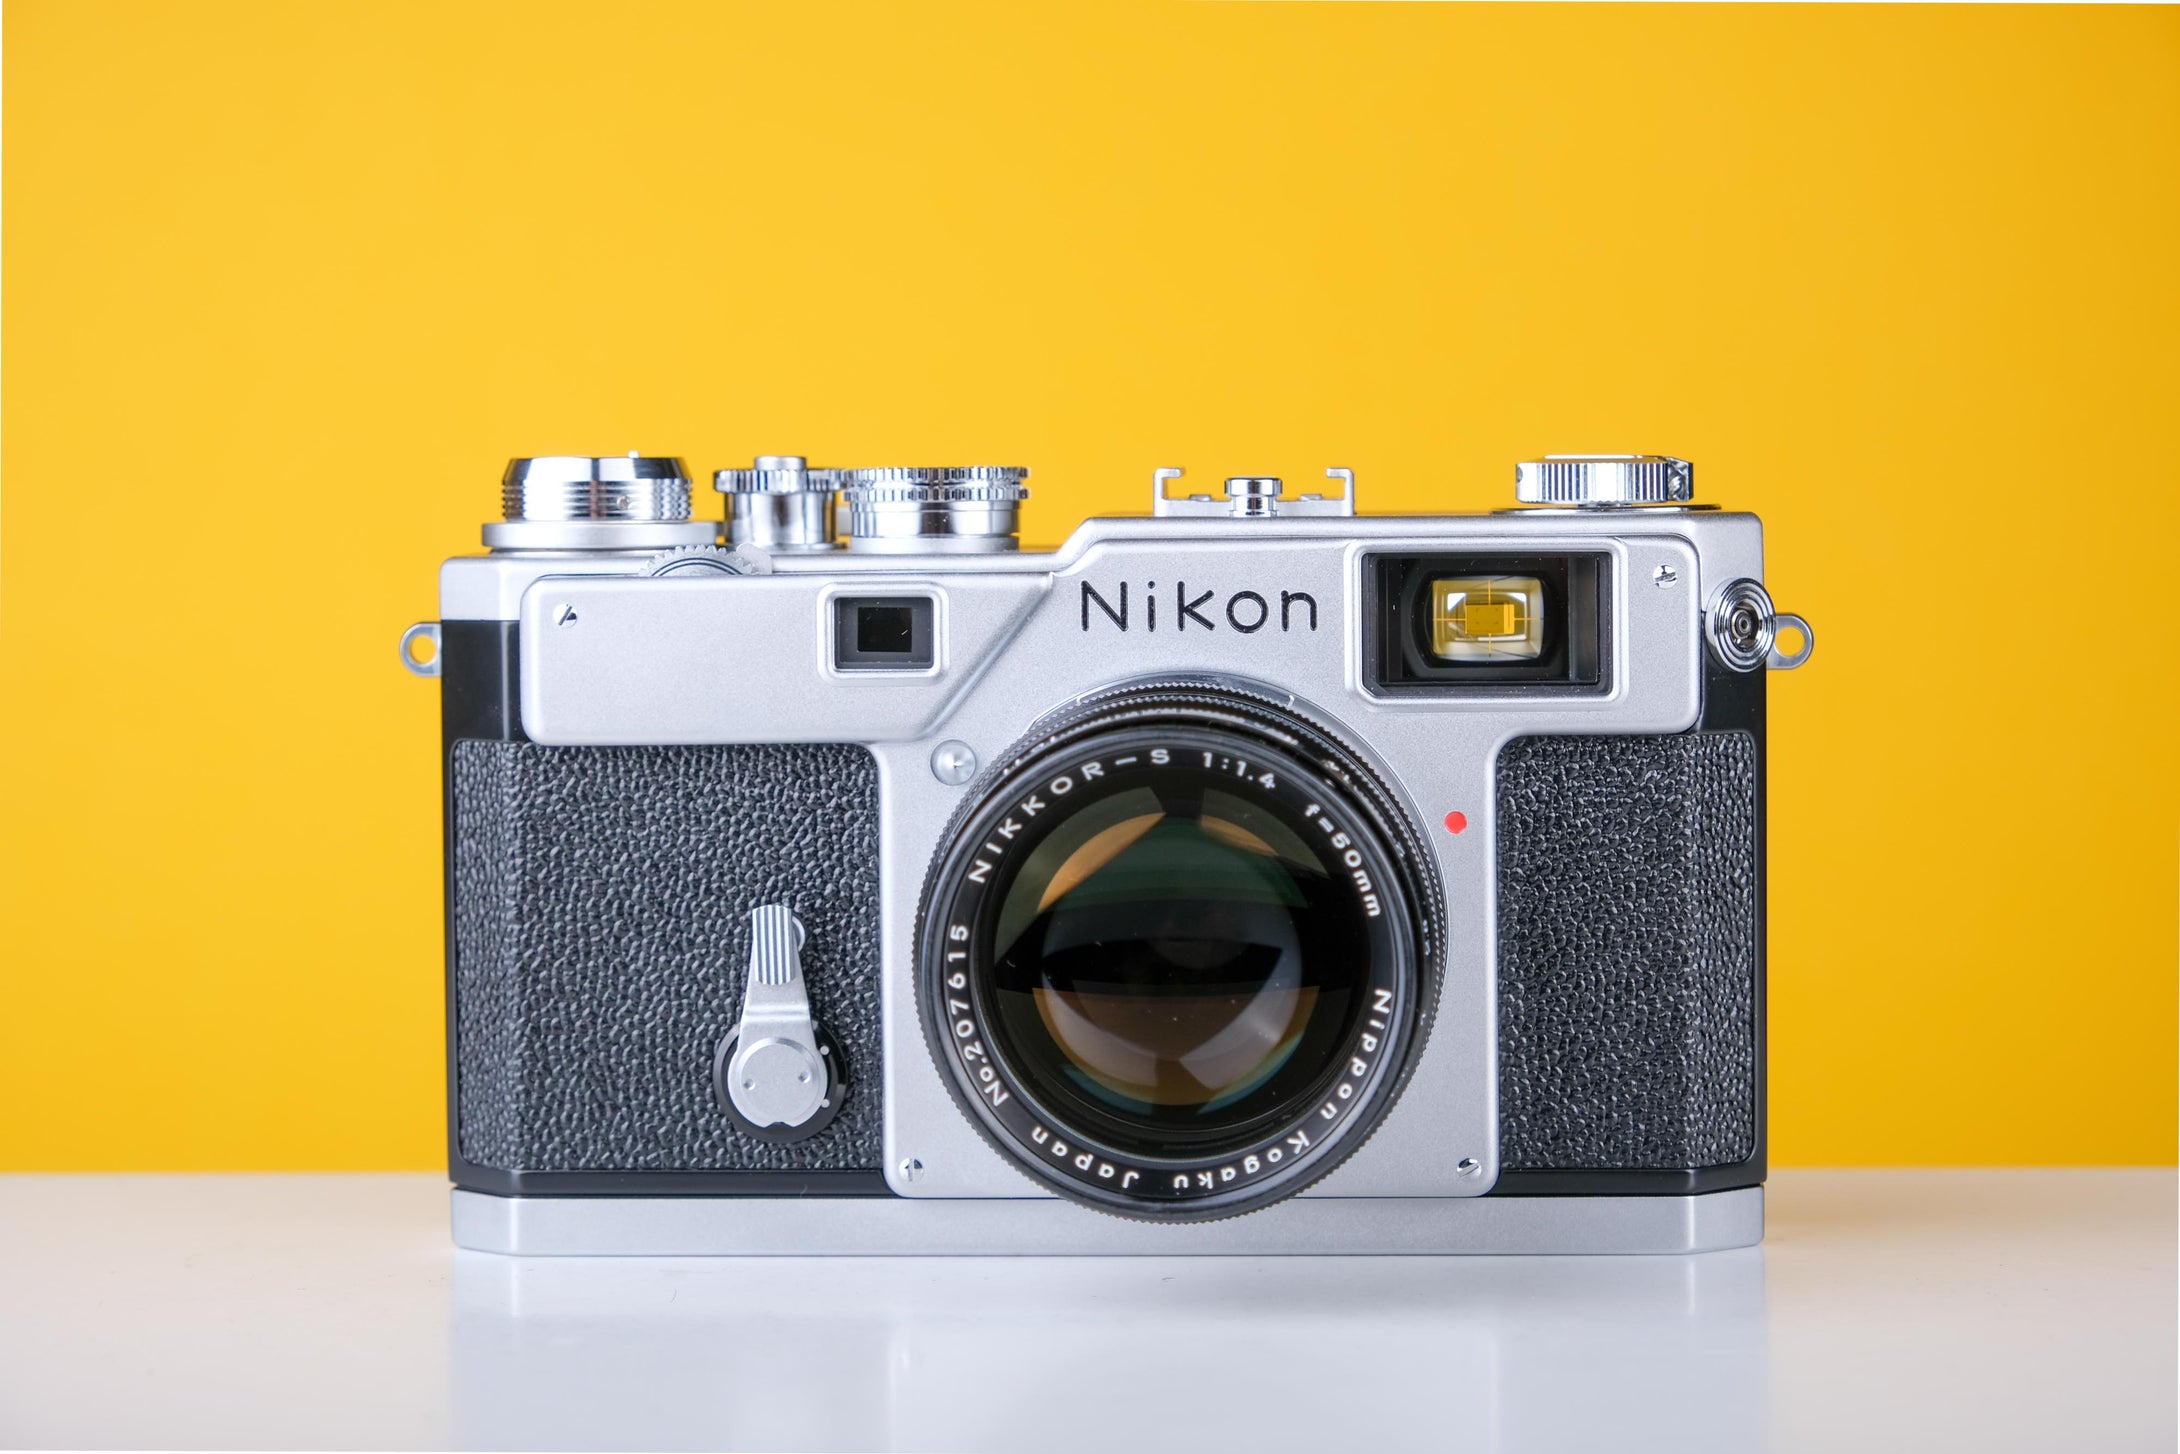 Nikon S3 Limited Edition Year 200 35mm Rangefinder Film Camera with Nikkor-S 50mm f1.4 Lens Boxed